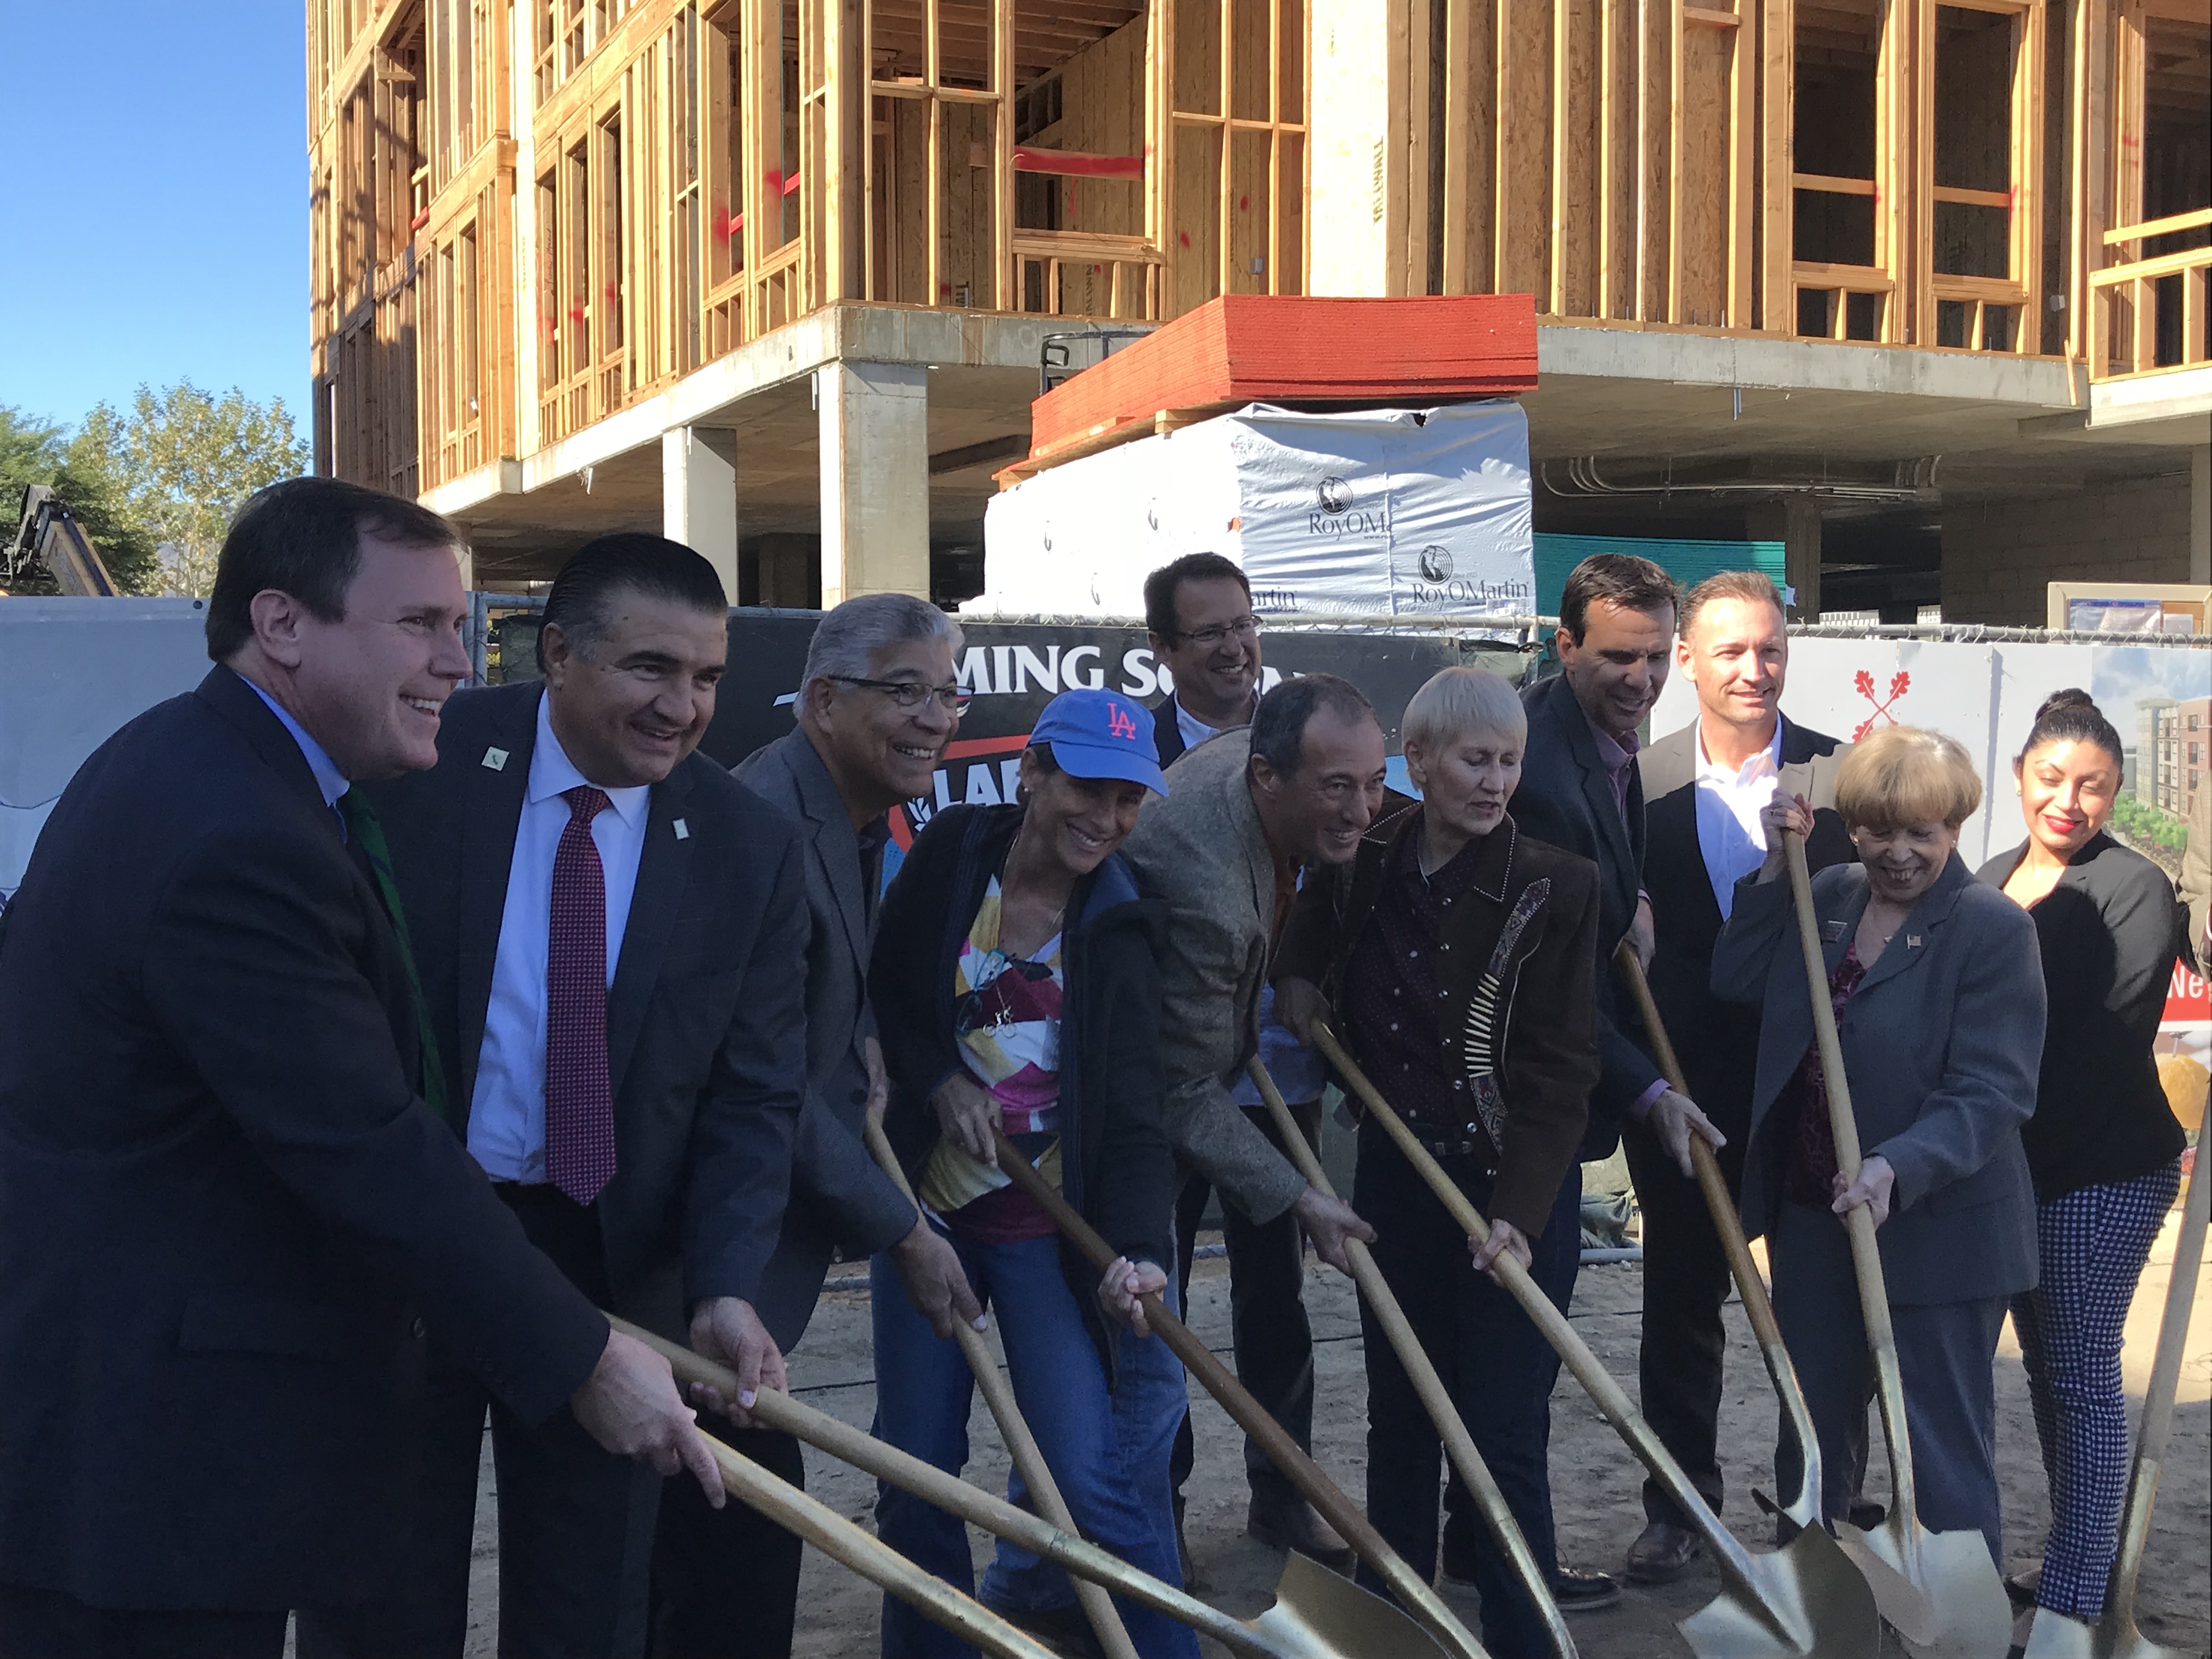 Groundbreaking for a new Laemmle Theater in Newhall